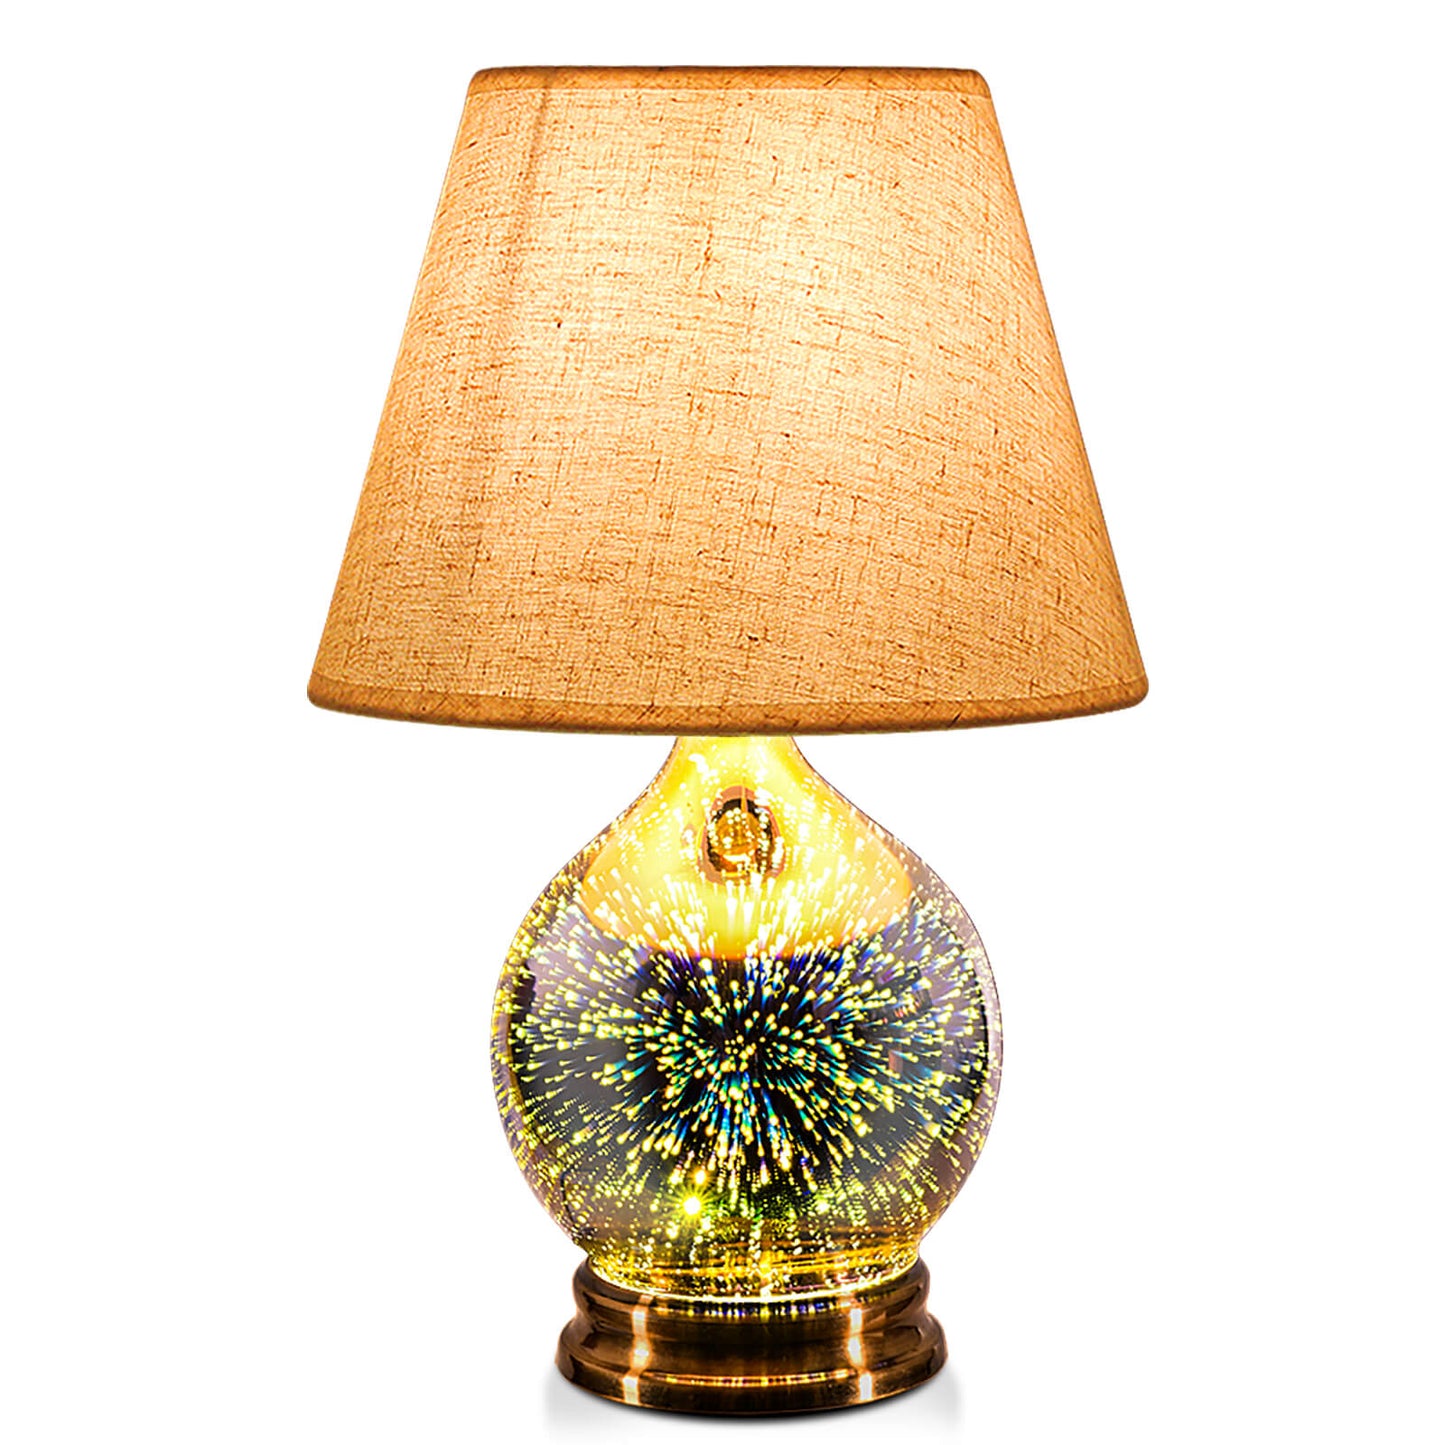 Table Lamp,Desk Lamp with Bulb Included - Modern Lamp with Unique Lampshade,Handmade 3D Effect Glass Base - Perfect for Table in Bedroom,Bedside,Living Room,Office (E12 LED Bulb Included)